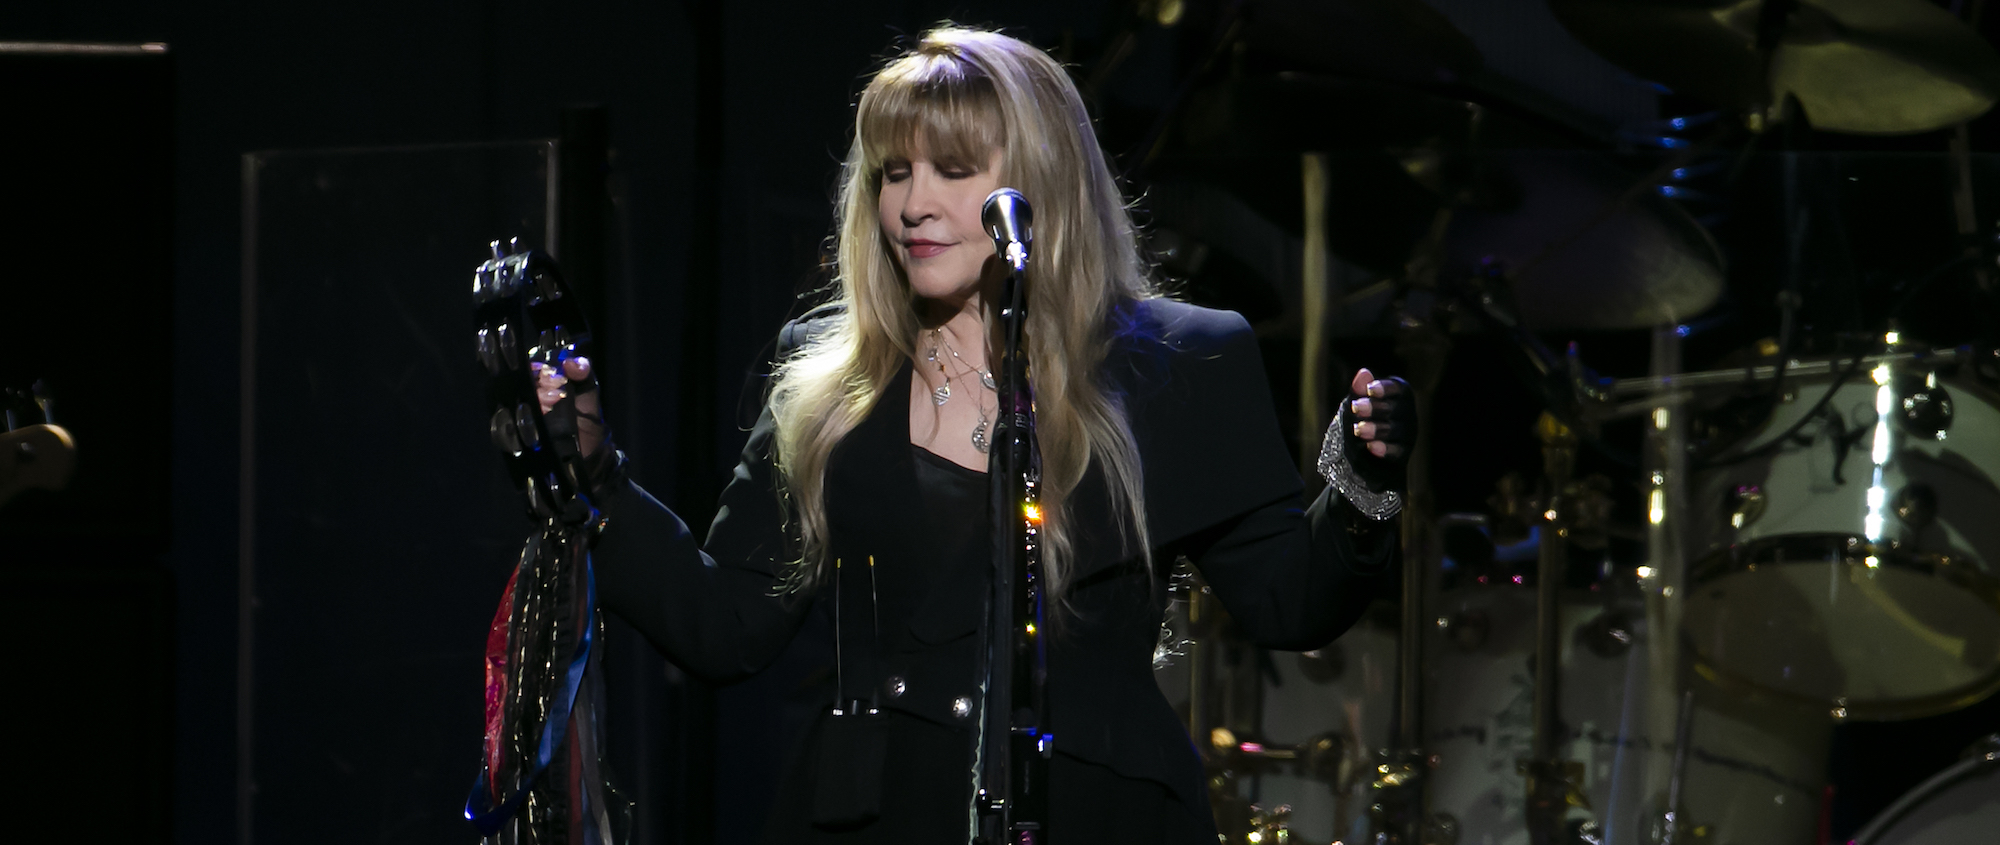 Stevie Nicks Sends Message of Support to Sheryl Crow on Rock Hall Induction